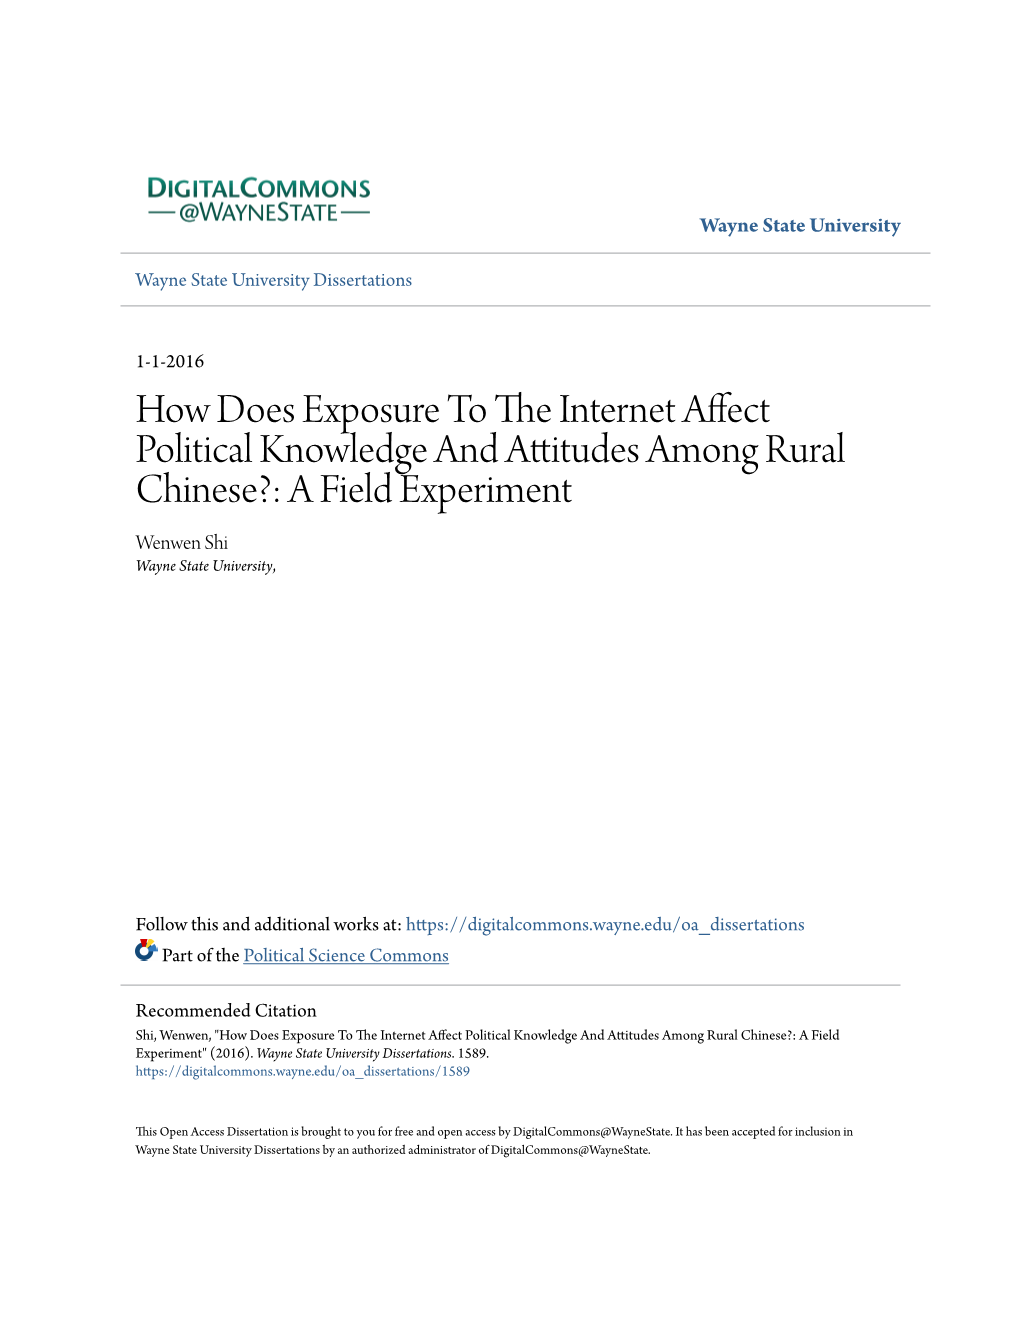 How Does Exposure to the Internet Affect Political Knowledge and Attitudes Among Rural Chinese?: a Field Experiment